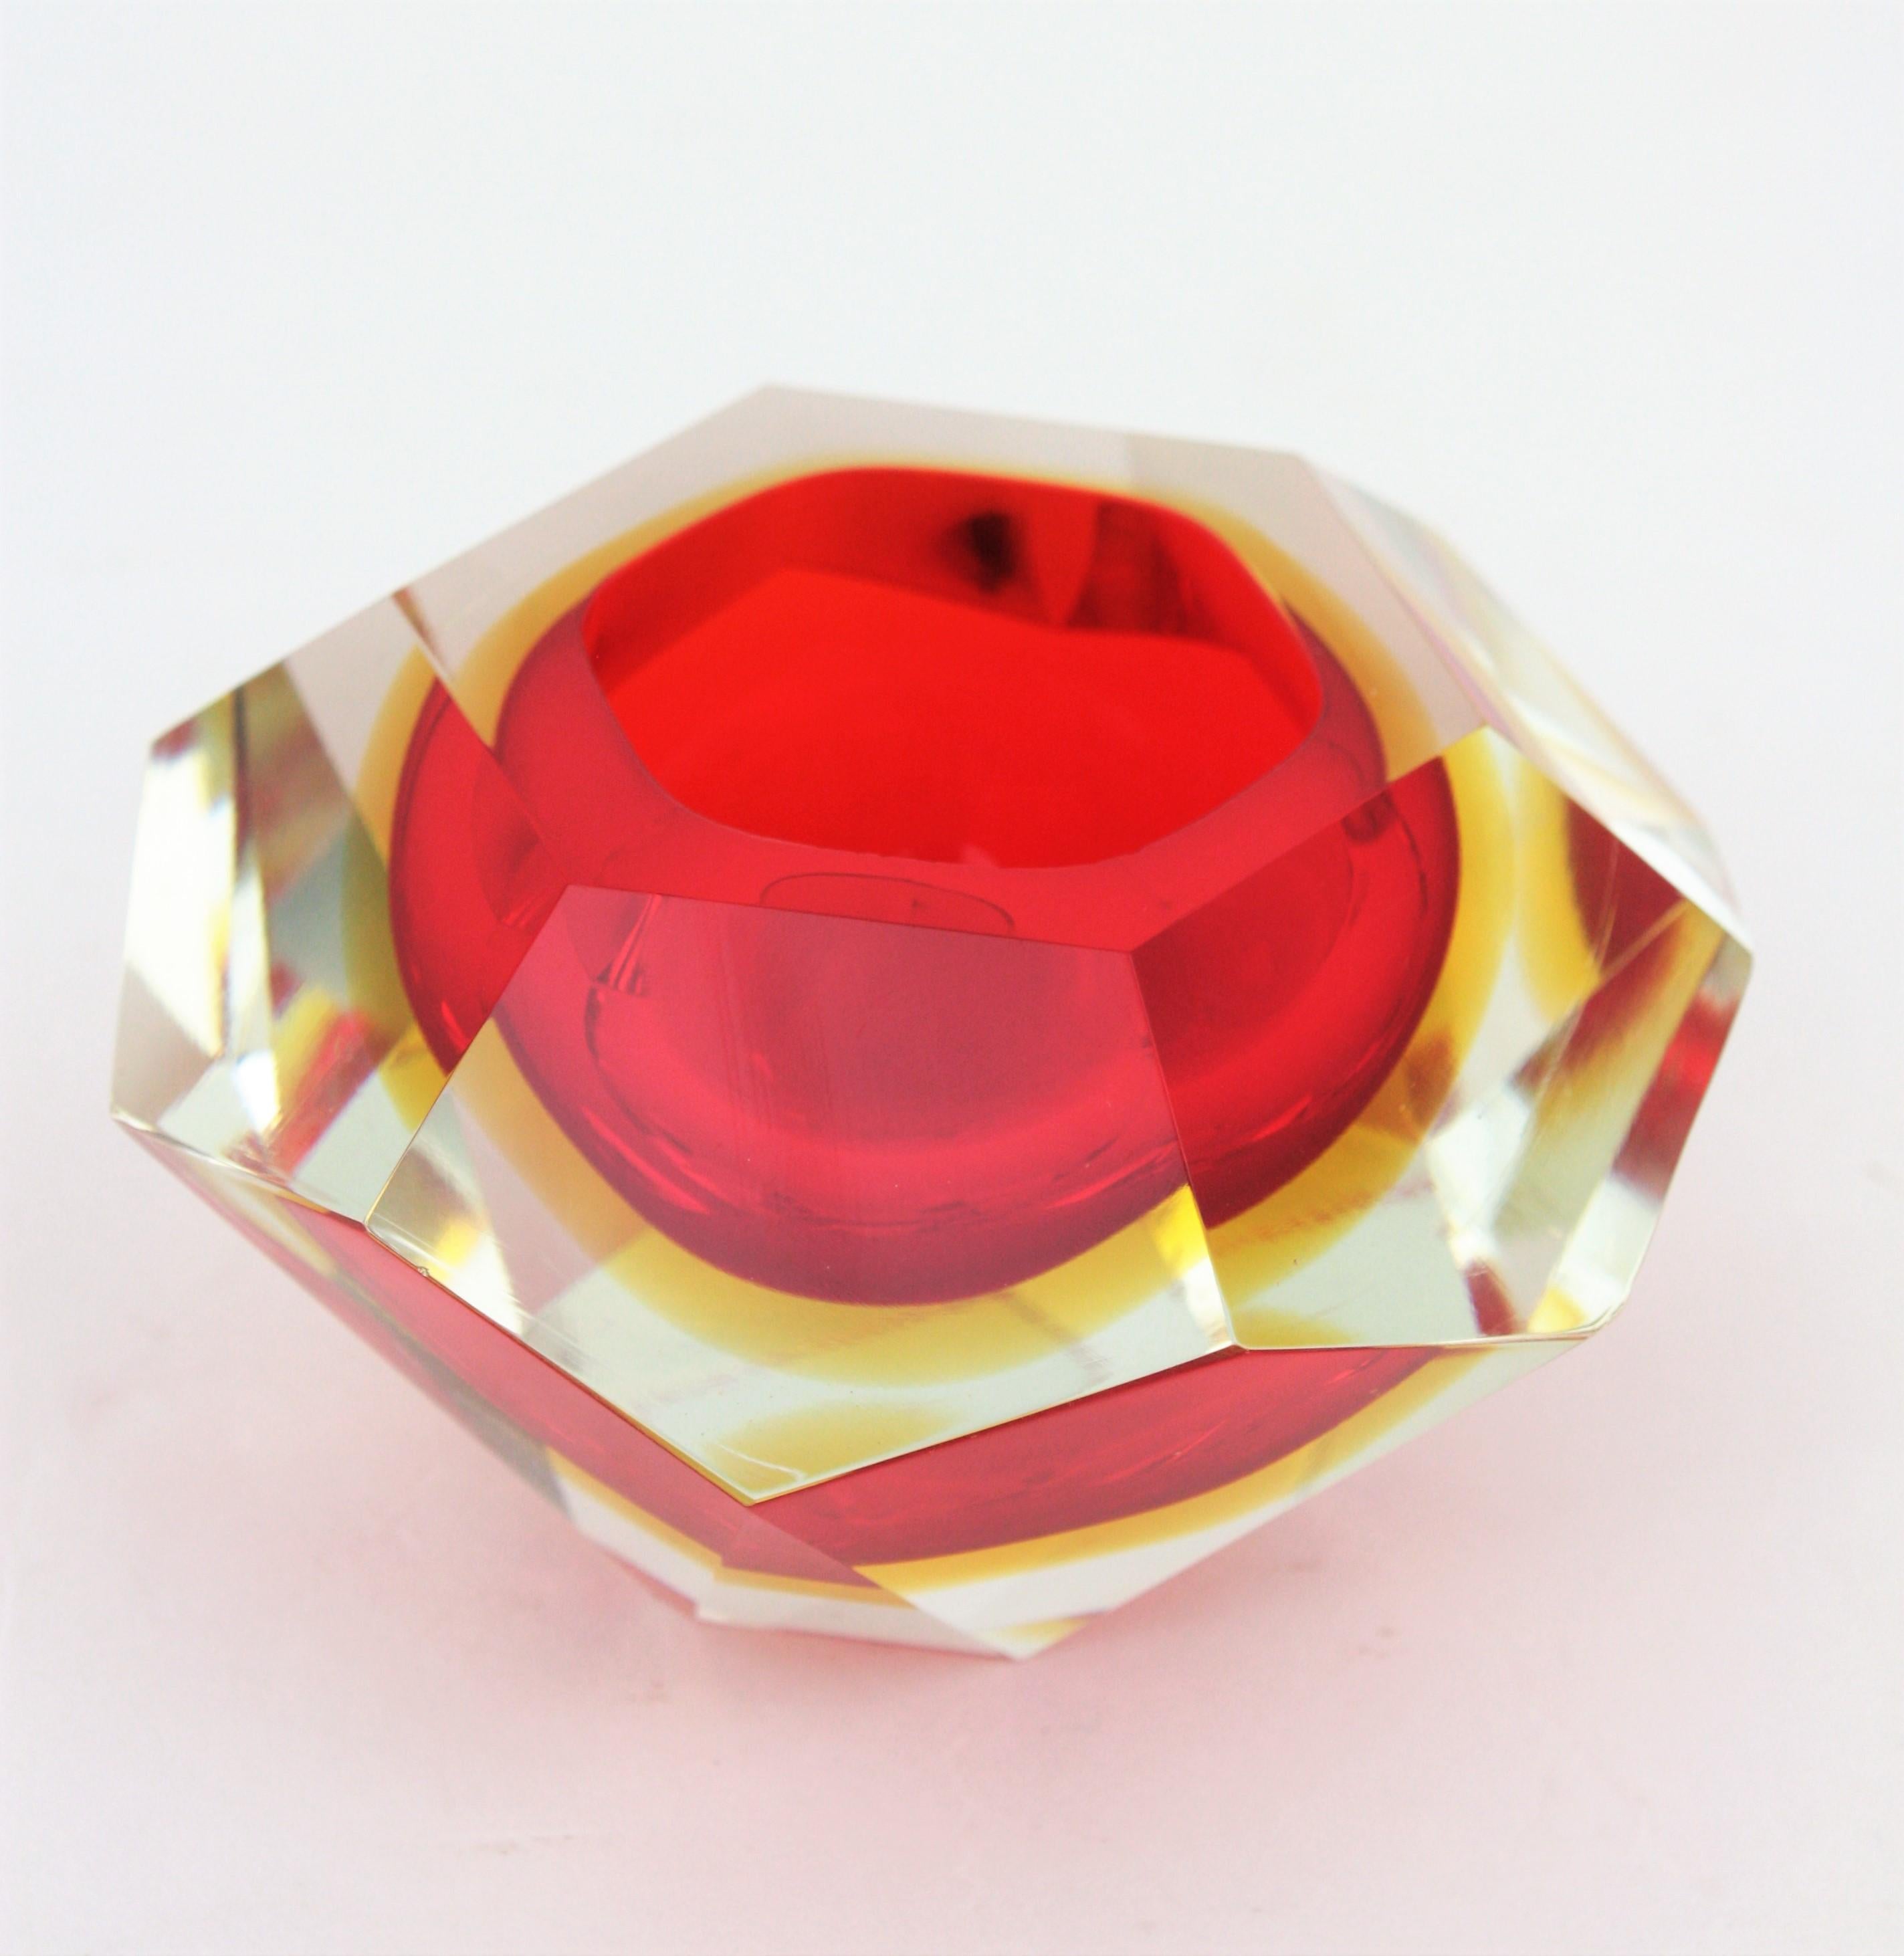 Flavio Poli Murano Red, Yellow and Clear Faceted Glass Diamond Bowl or Ashtray For Sale 1